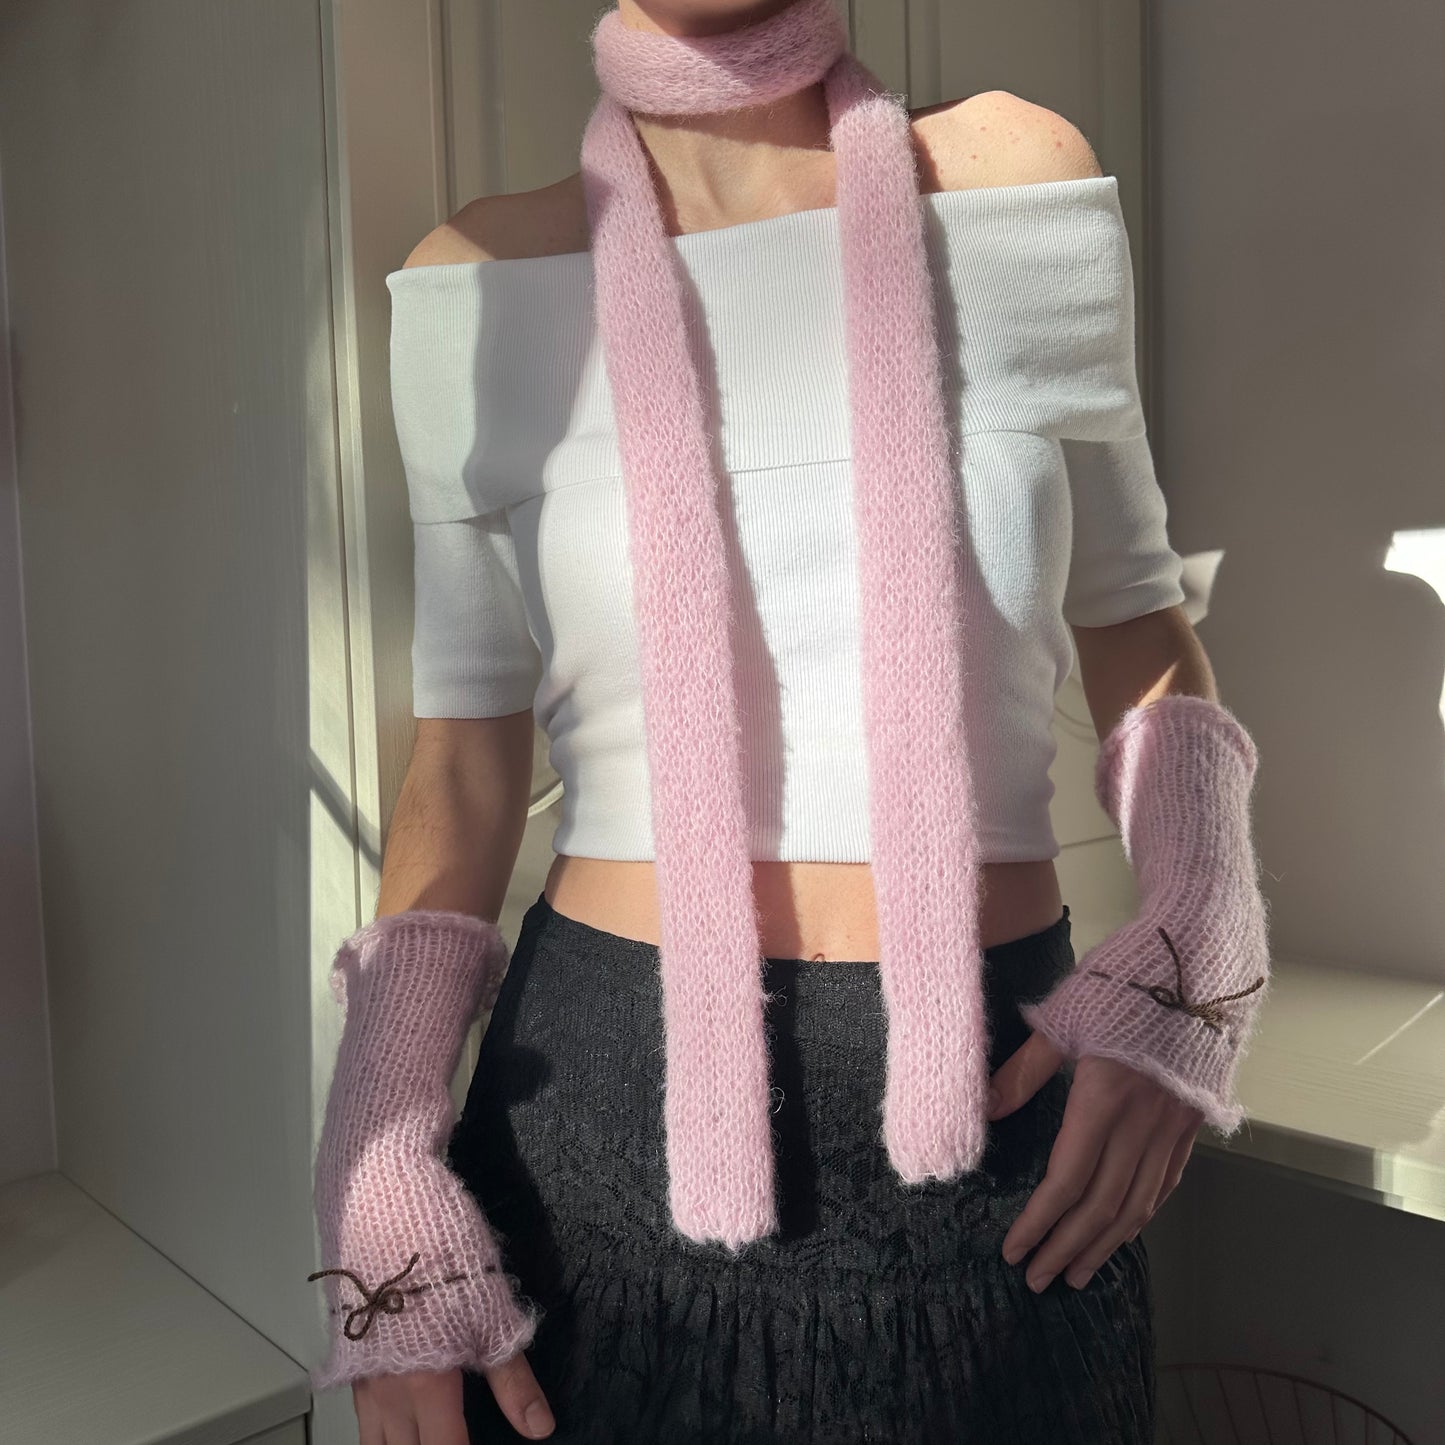 Handmade knitted mohair skinny scarf in baby pink